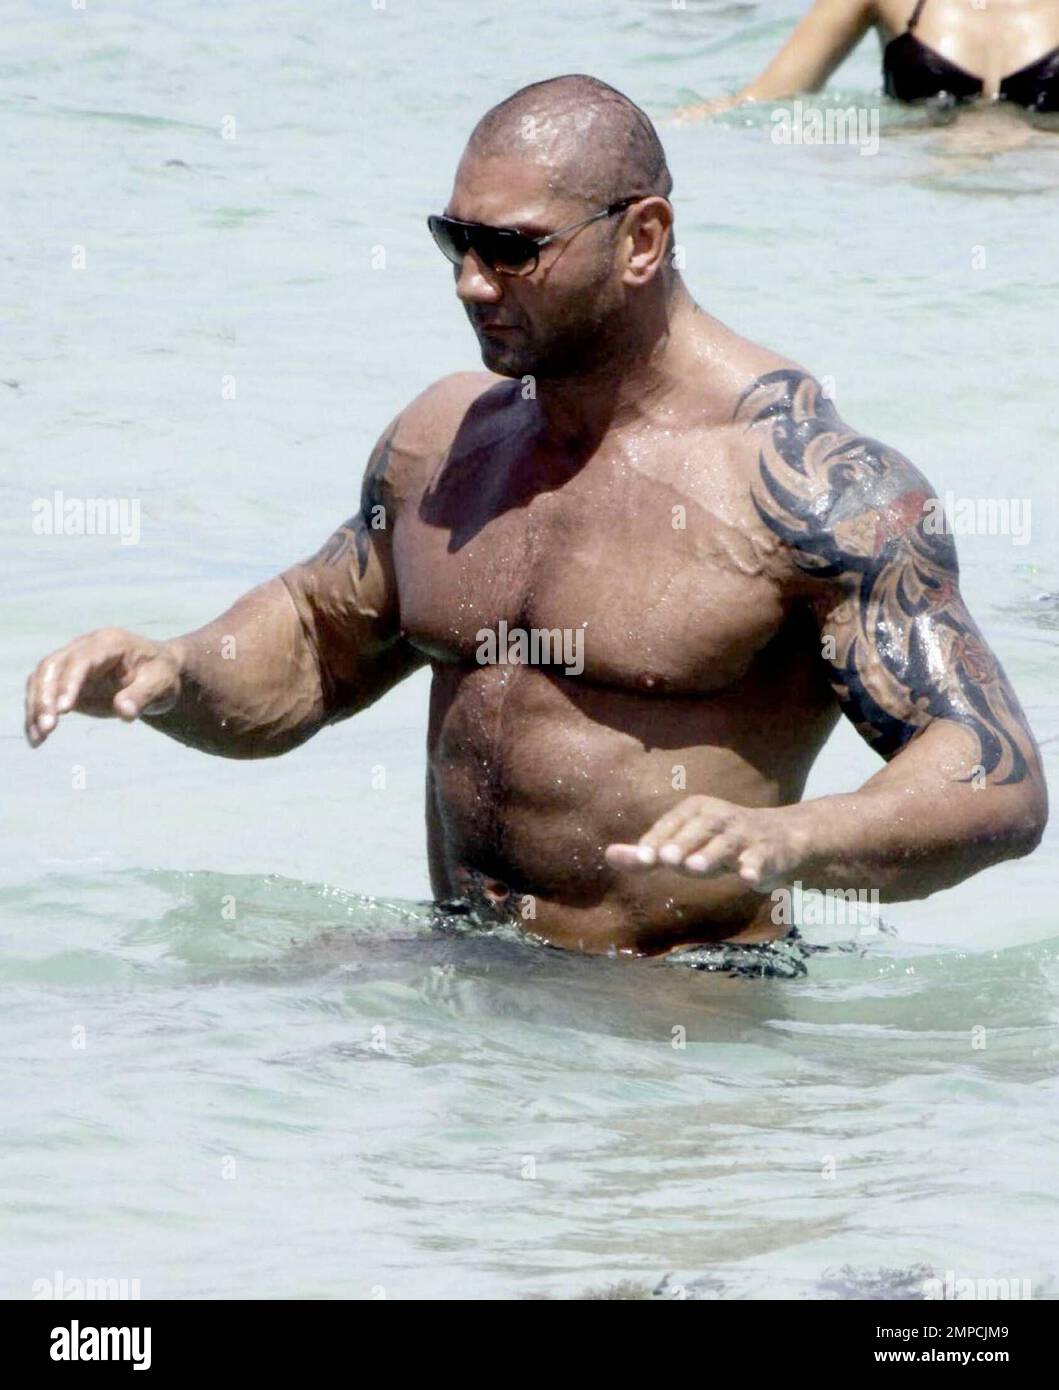 Wallpapers And Fashion Blog: Dave Batista Tattoos Wallpapers : WWE Wrestler